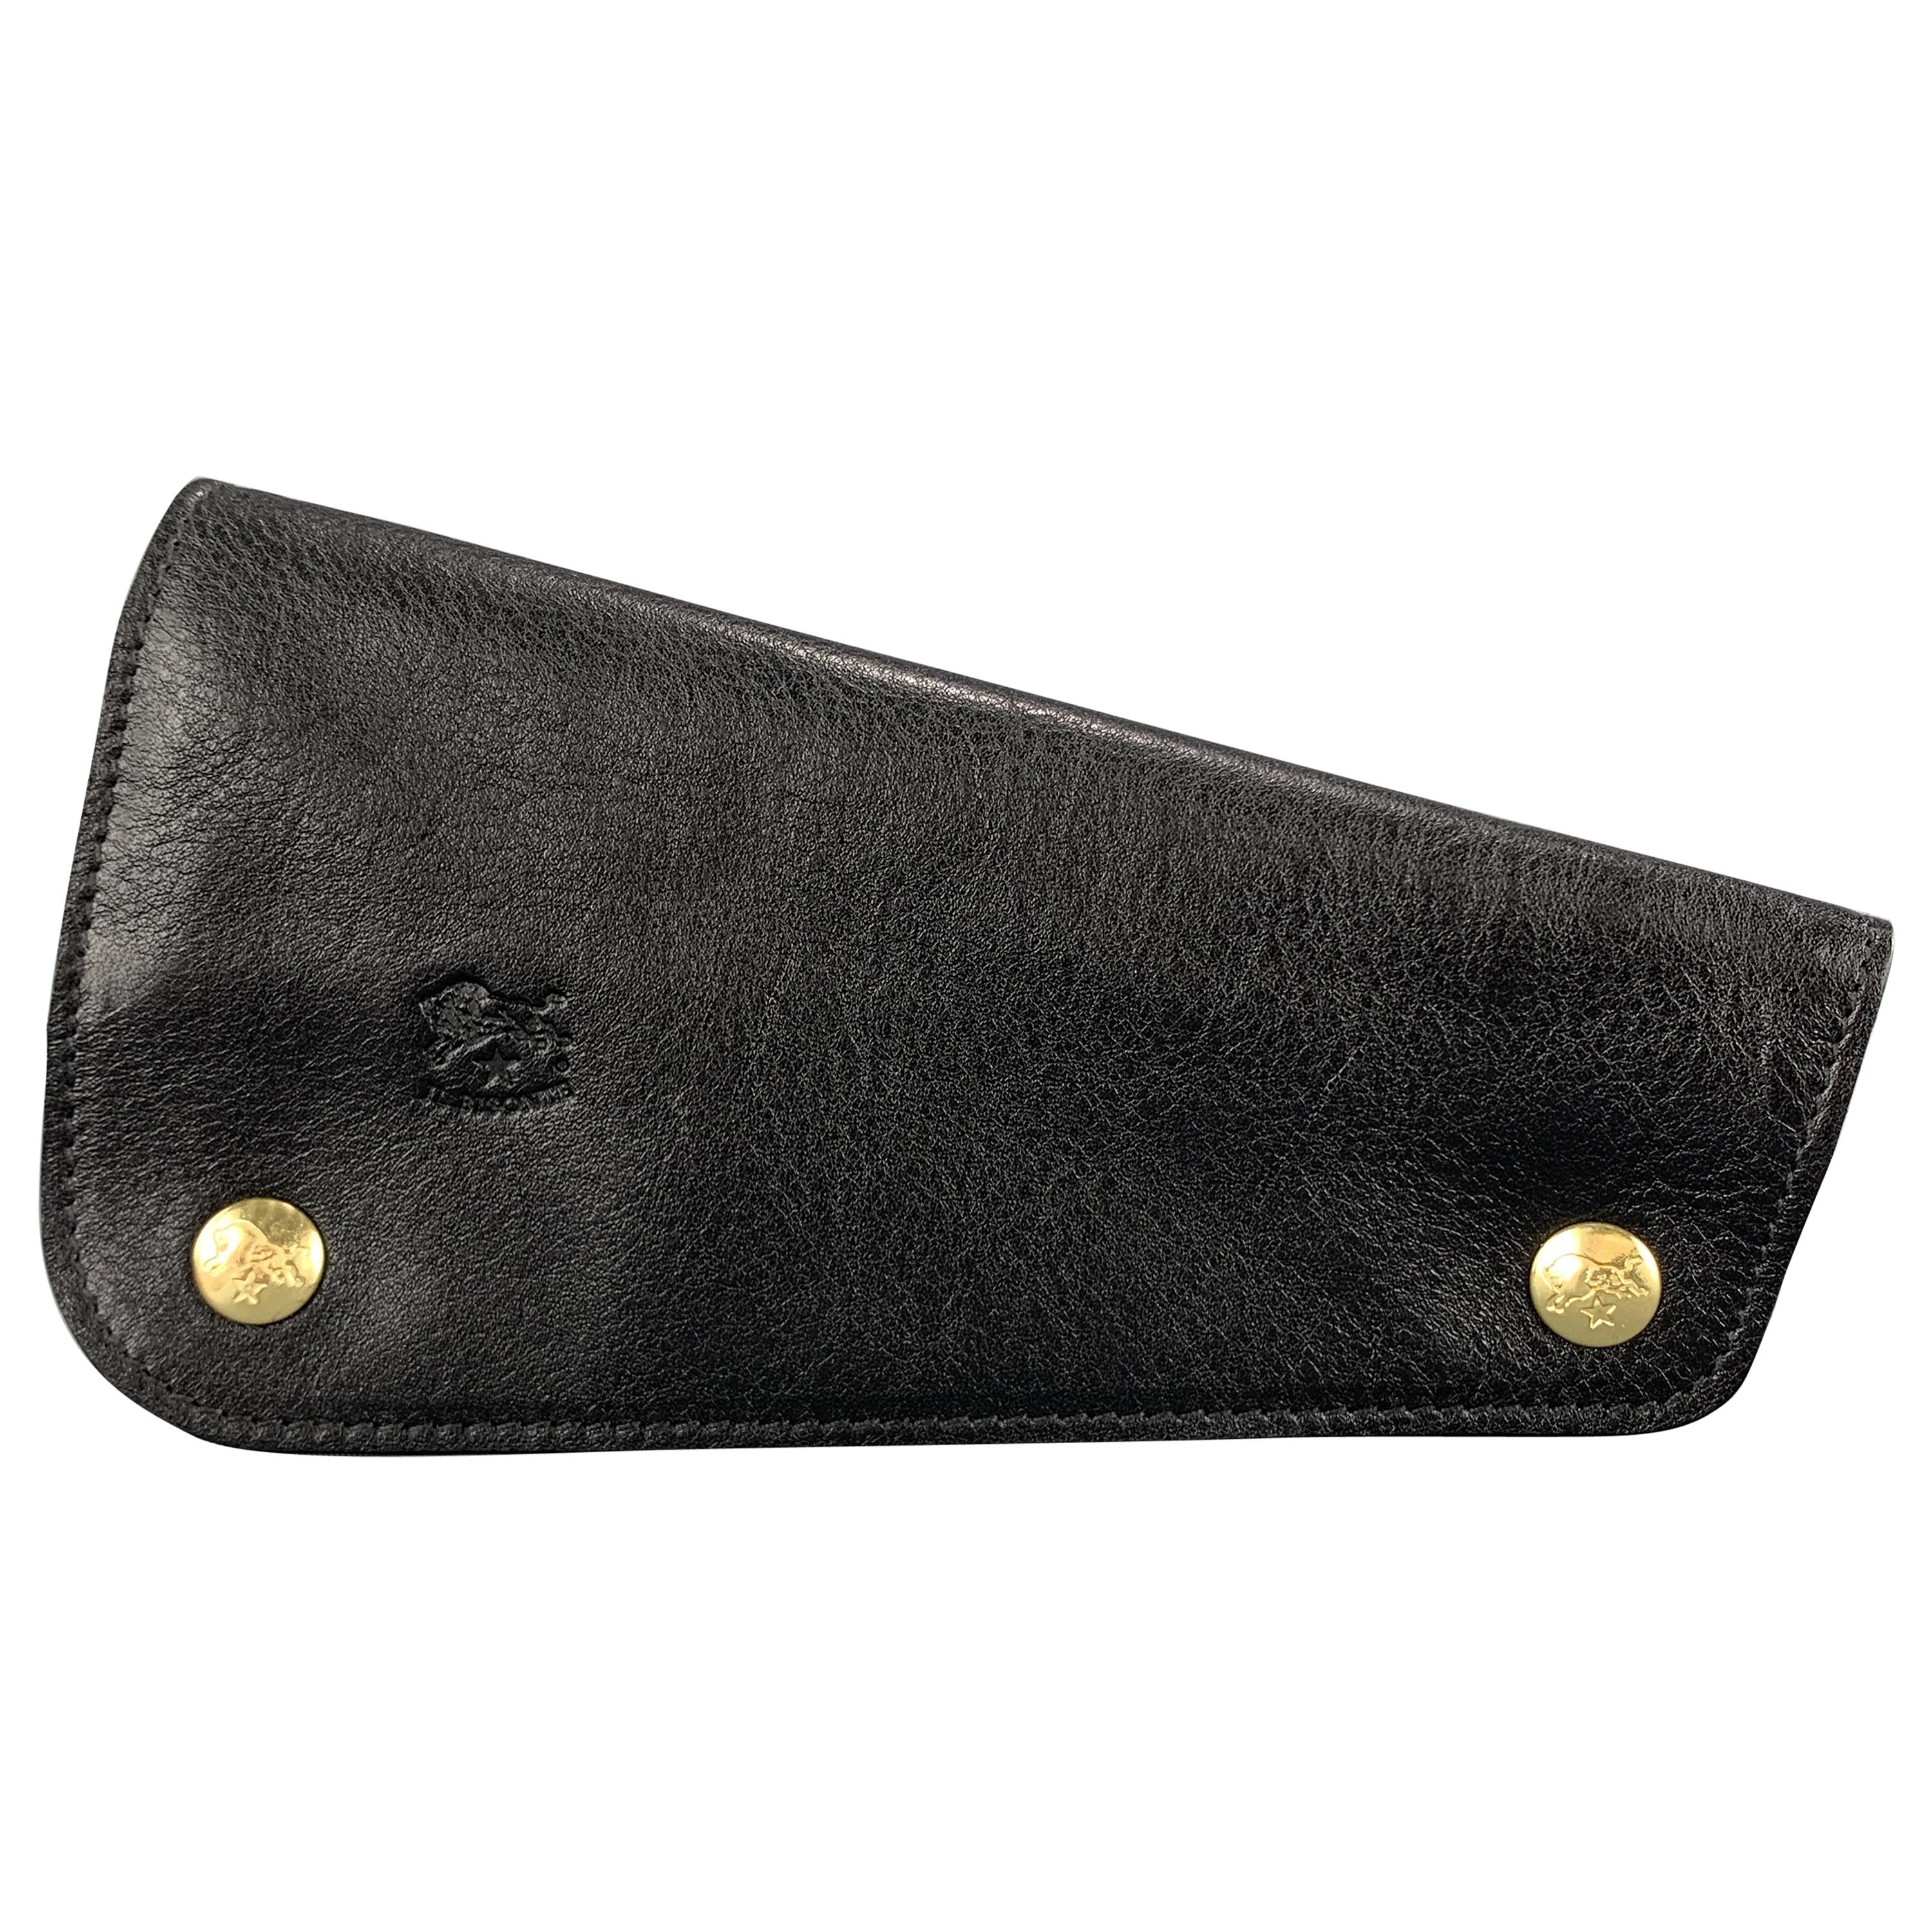 IL BISONTE Leather Black Leather Horizon Snap Pipe Case Wallet